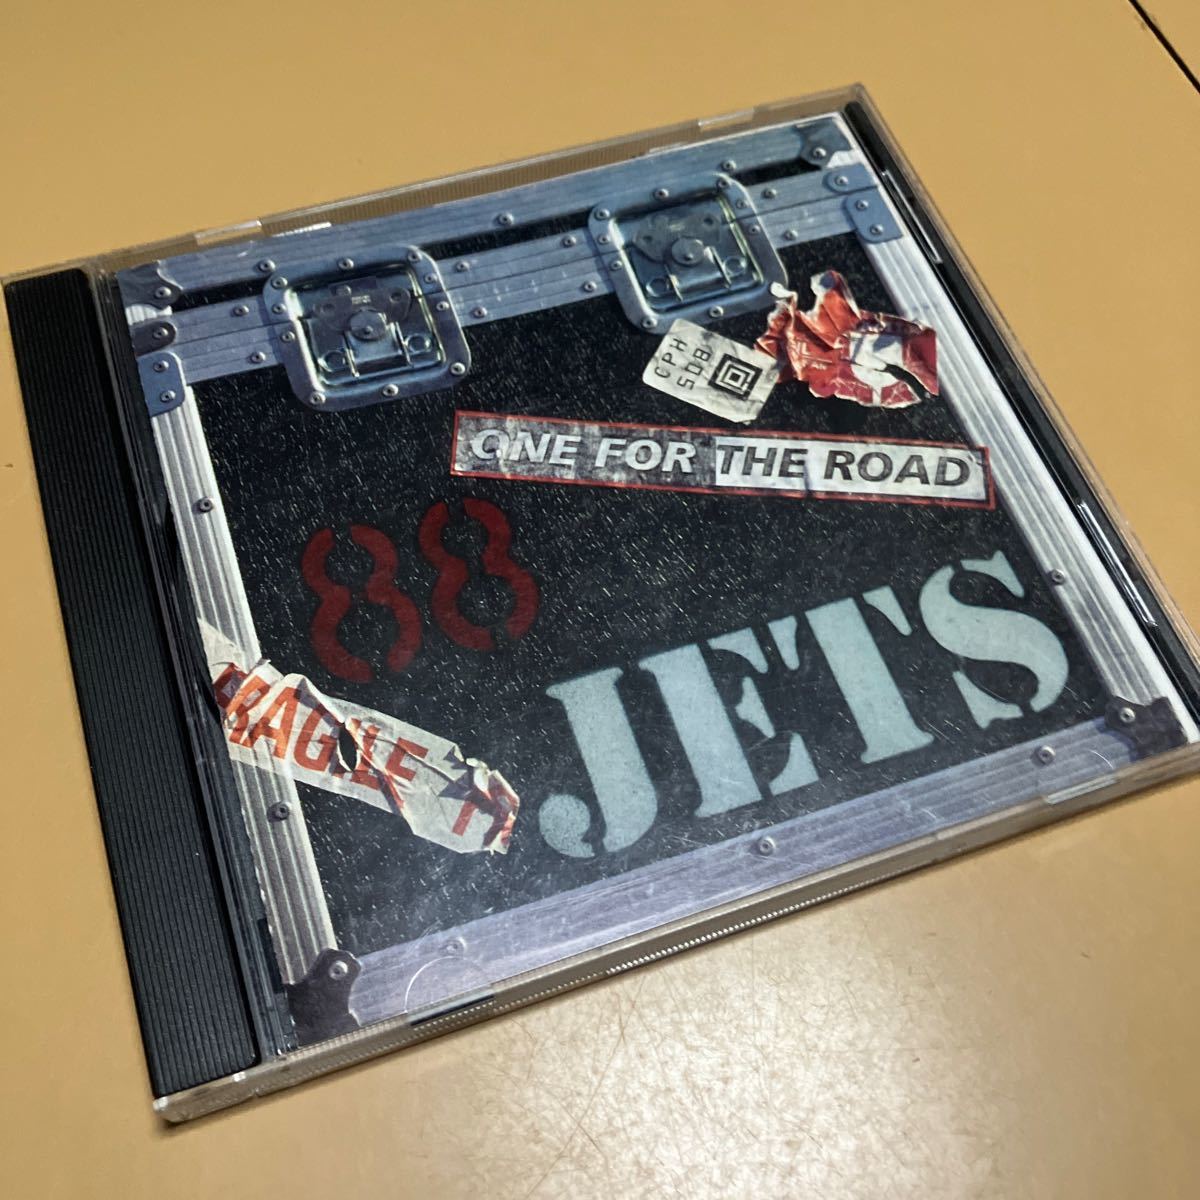 CD ロカビリー　サイコビリー　JETS one for the road _画像1